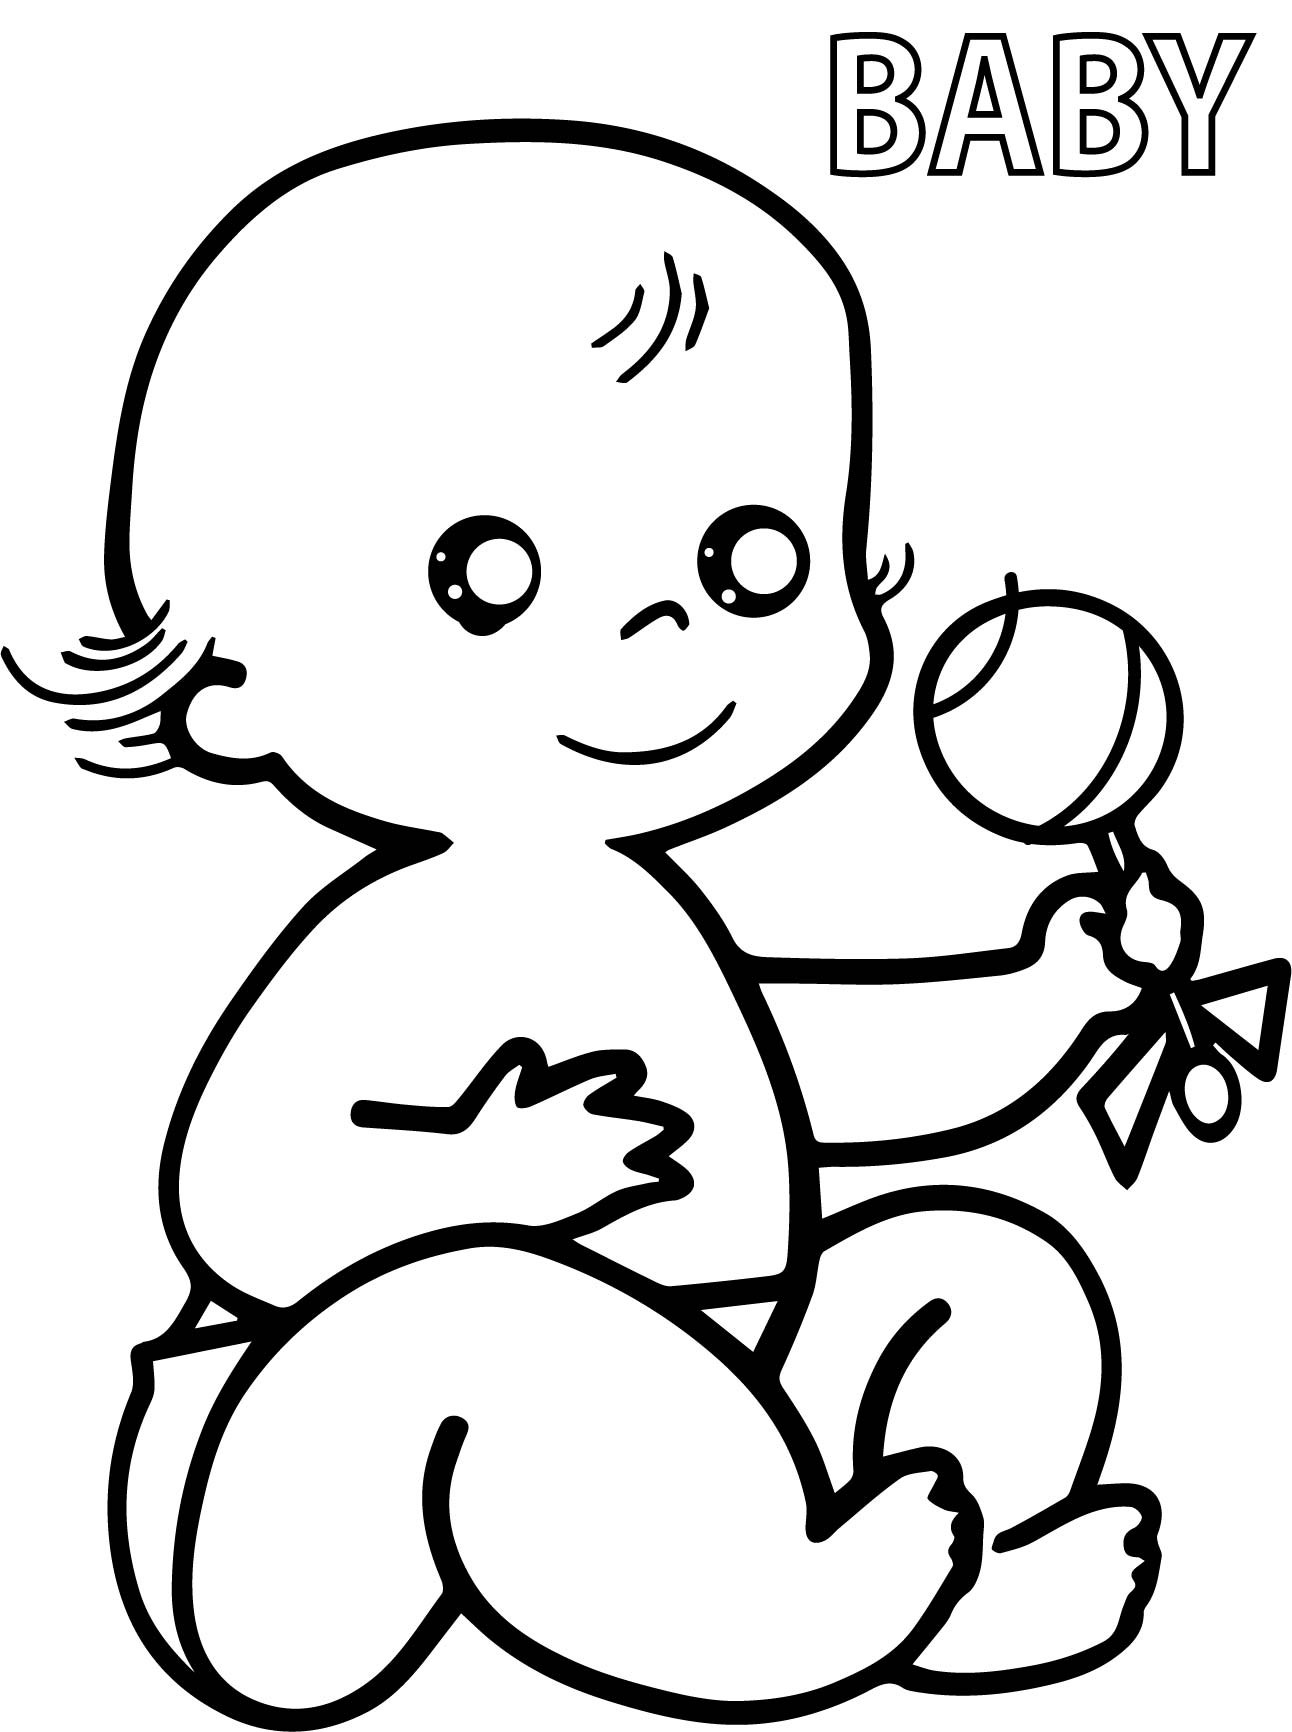 Coloring Book Pages Baby
 Baby Coloring Page Image Clipart grig3